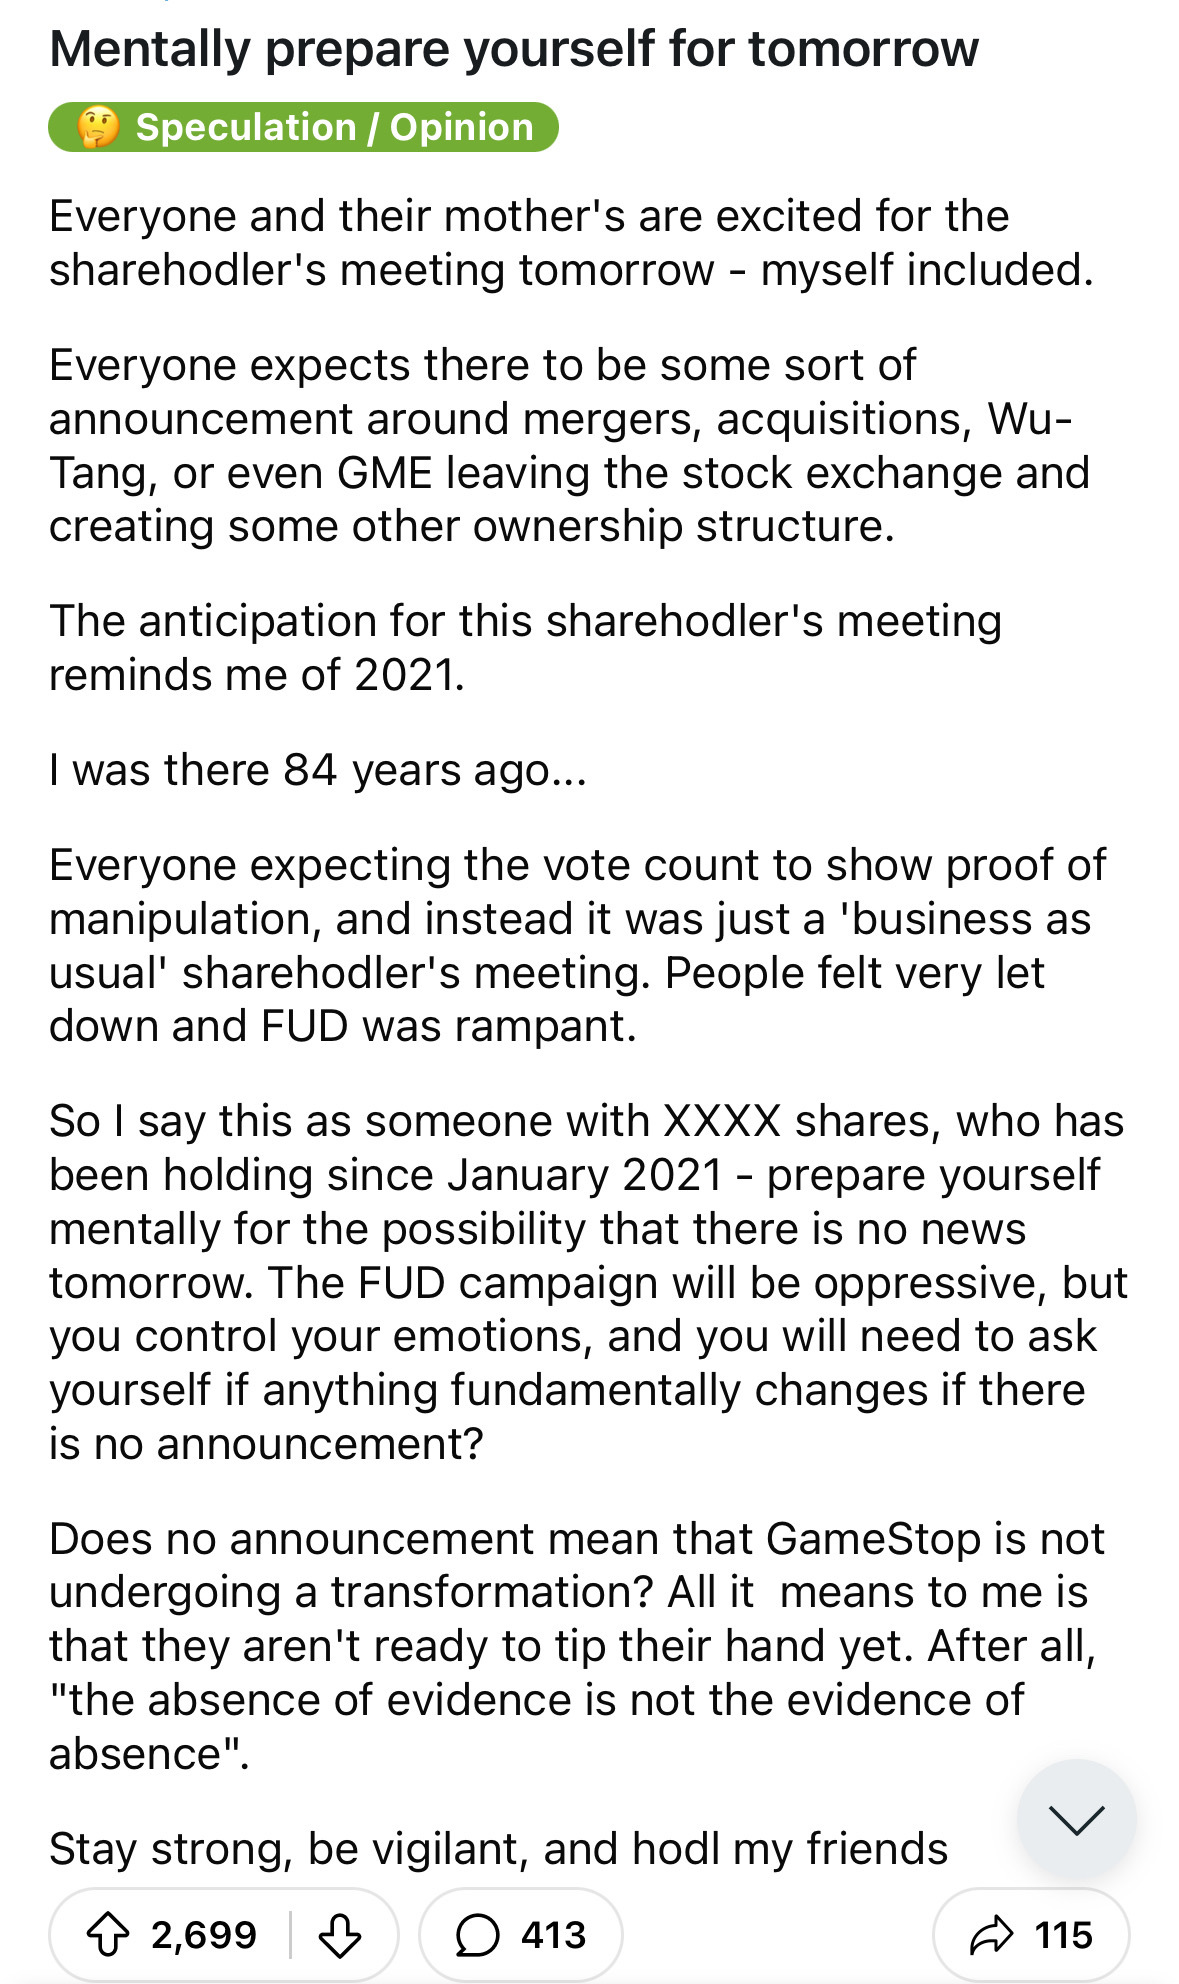 Don’t expect anything from shareholder meeting later